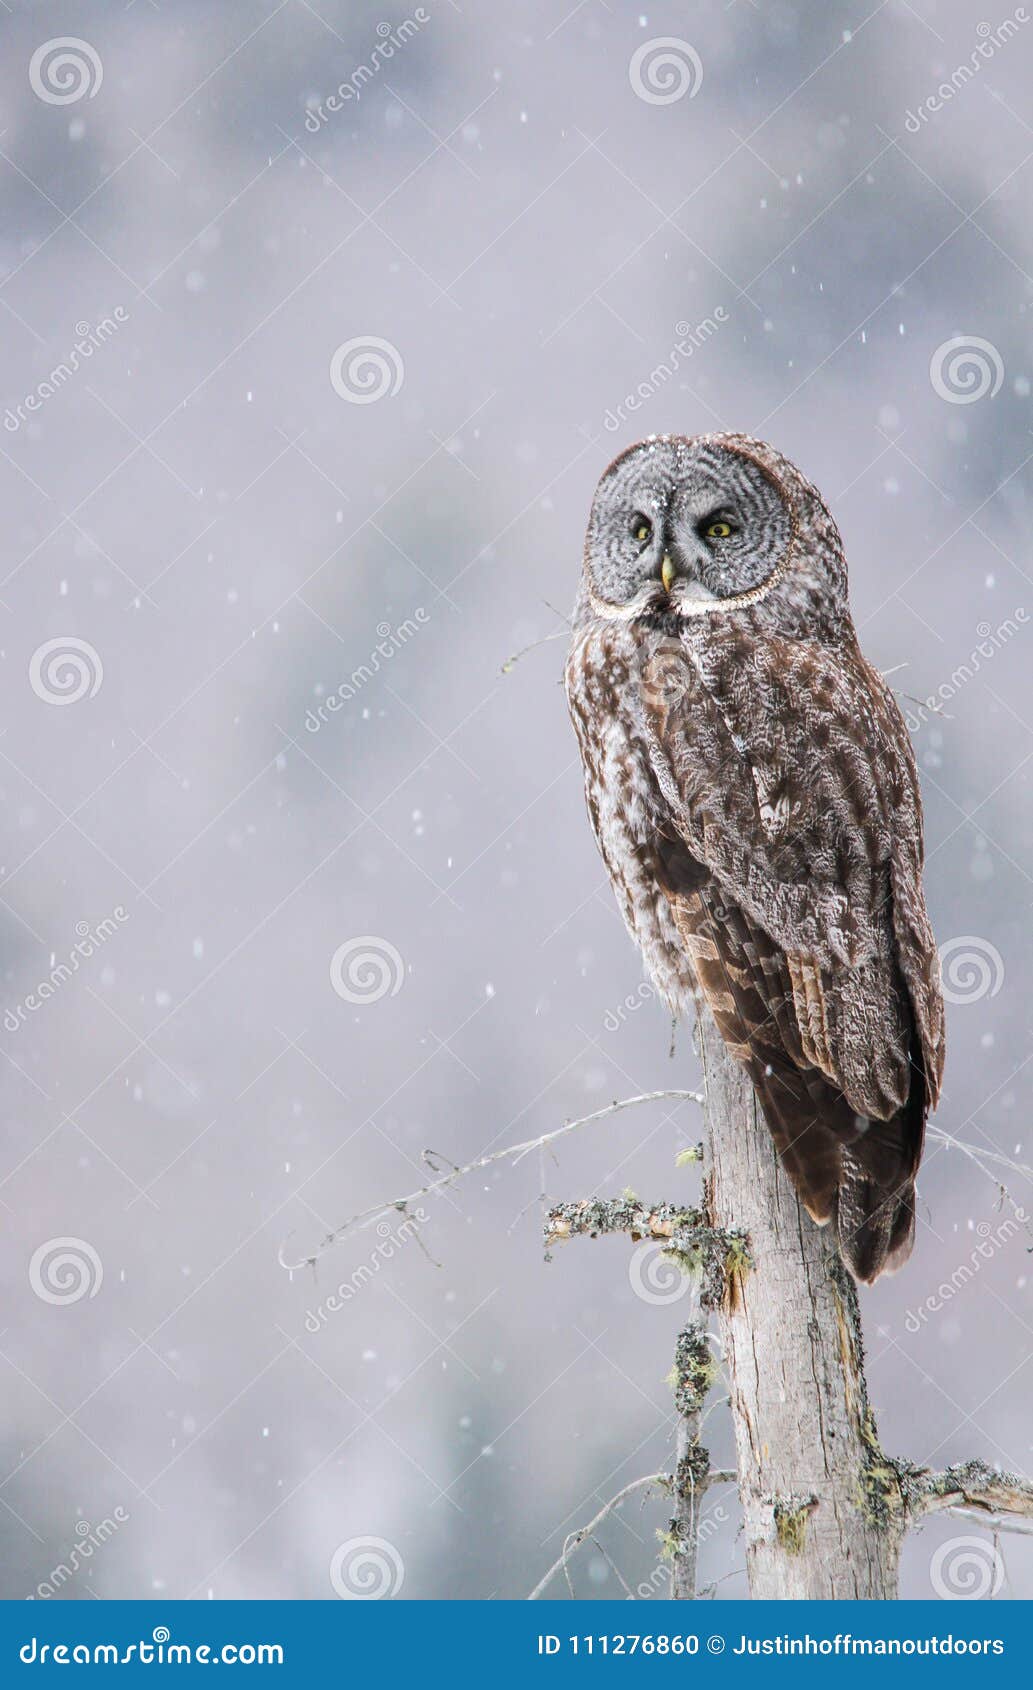 great gray owl perched on a tree stump while snow lightly falls